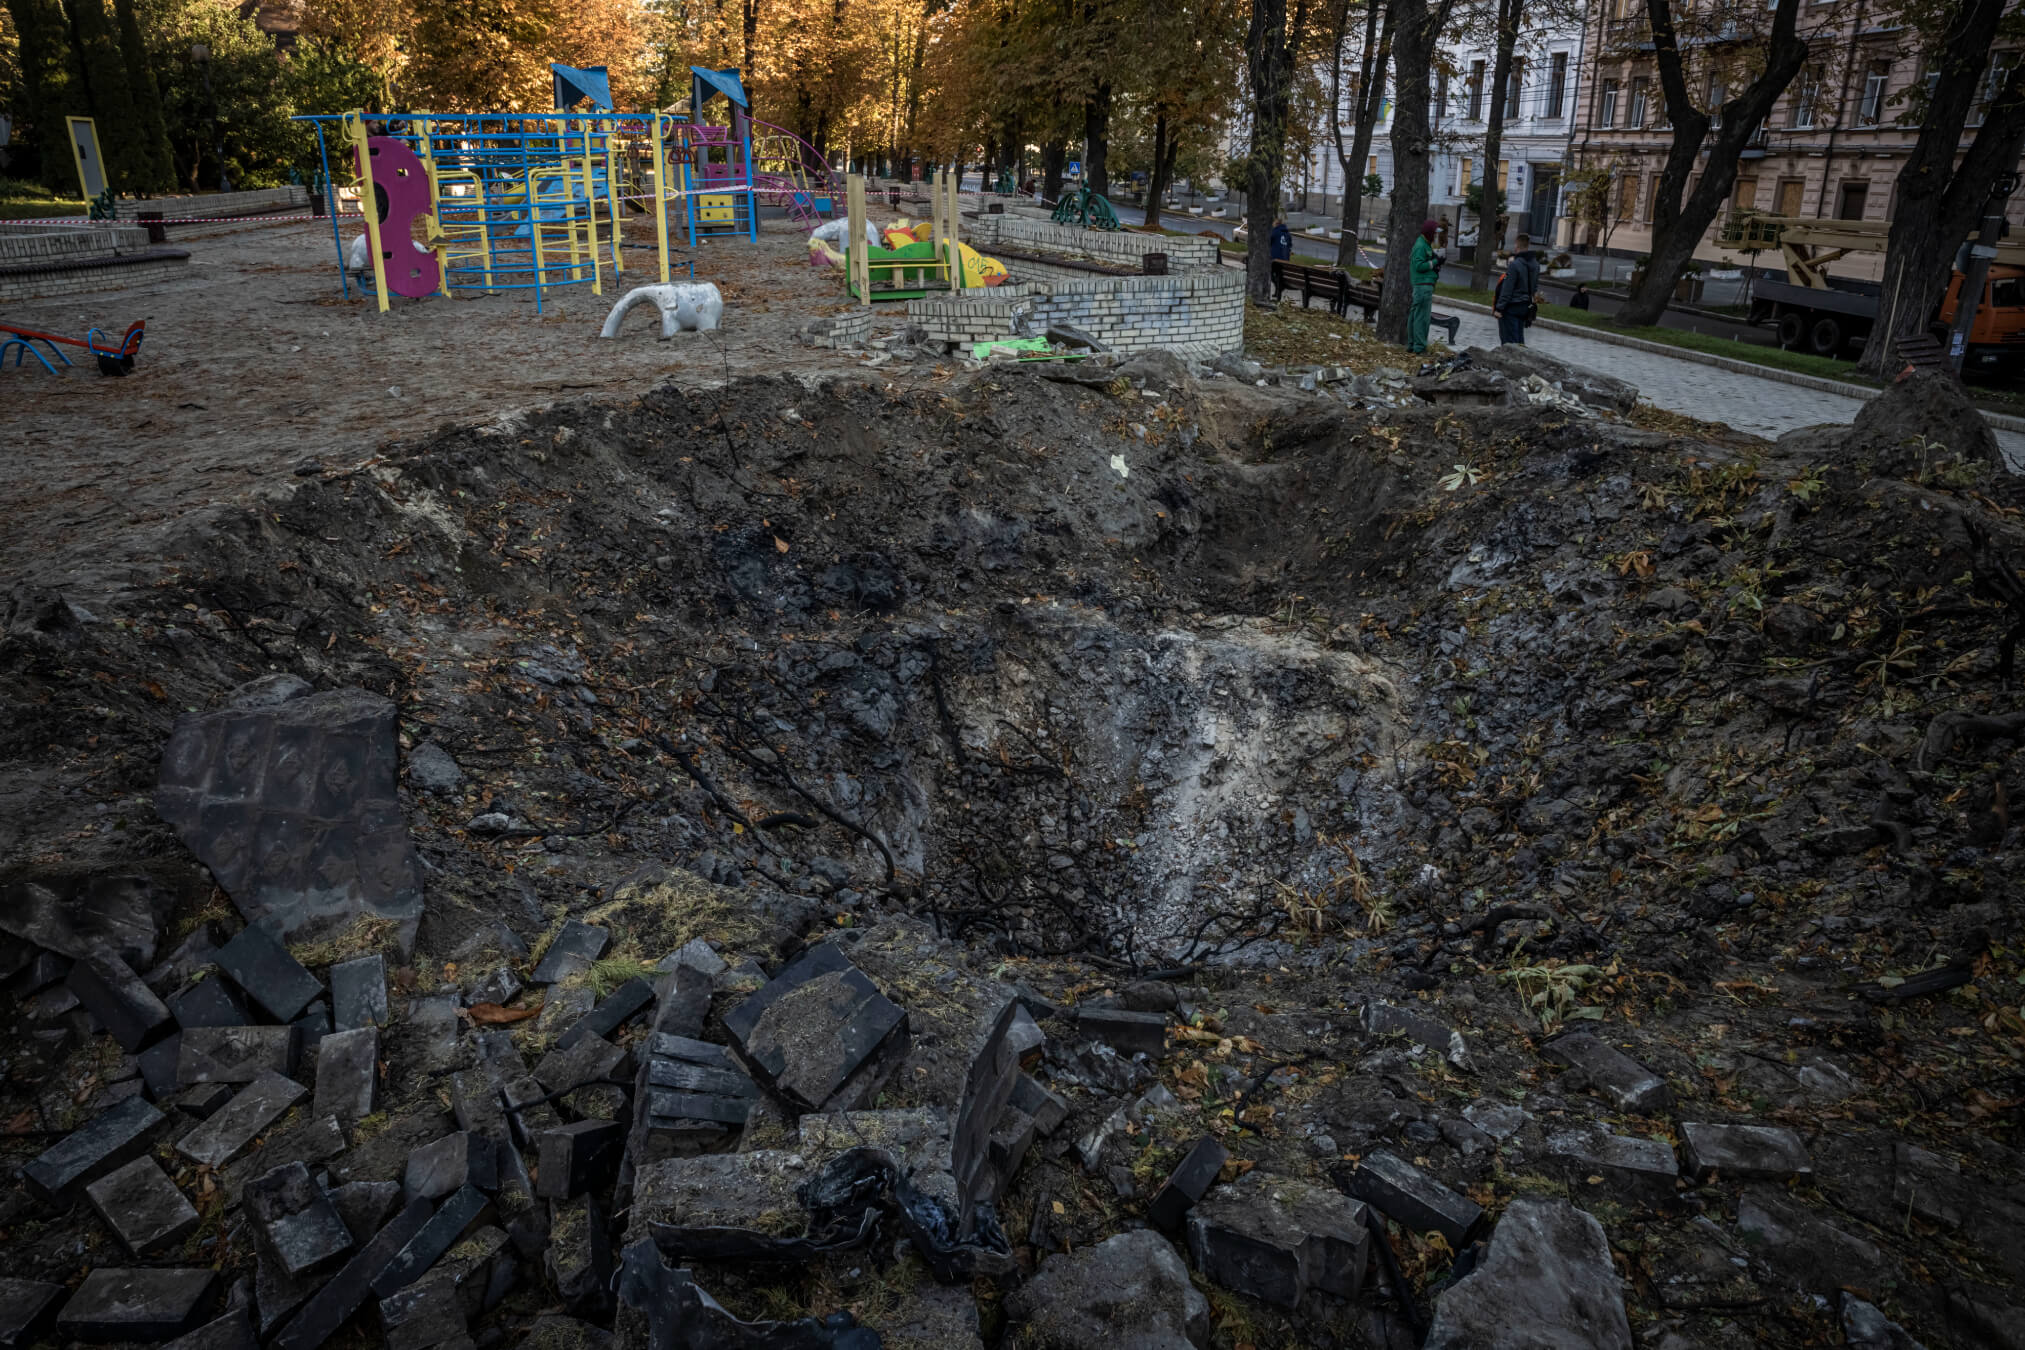 A playground stands near where a Russian missile struck Kyiv on Monday, Oct. 10, 2022, a few blocks from the author's apartment.